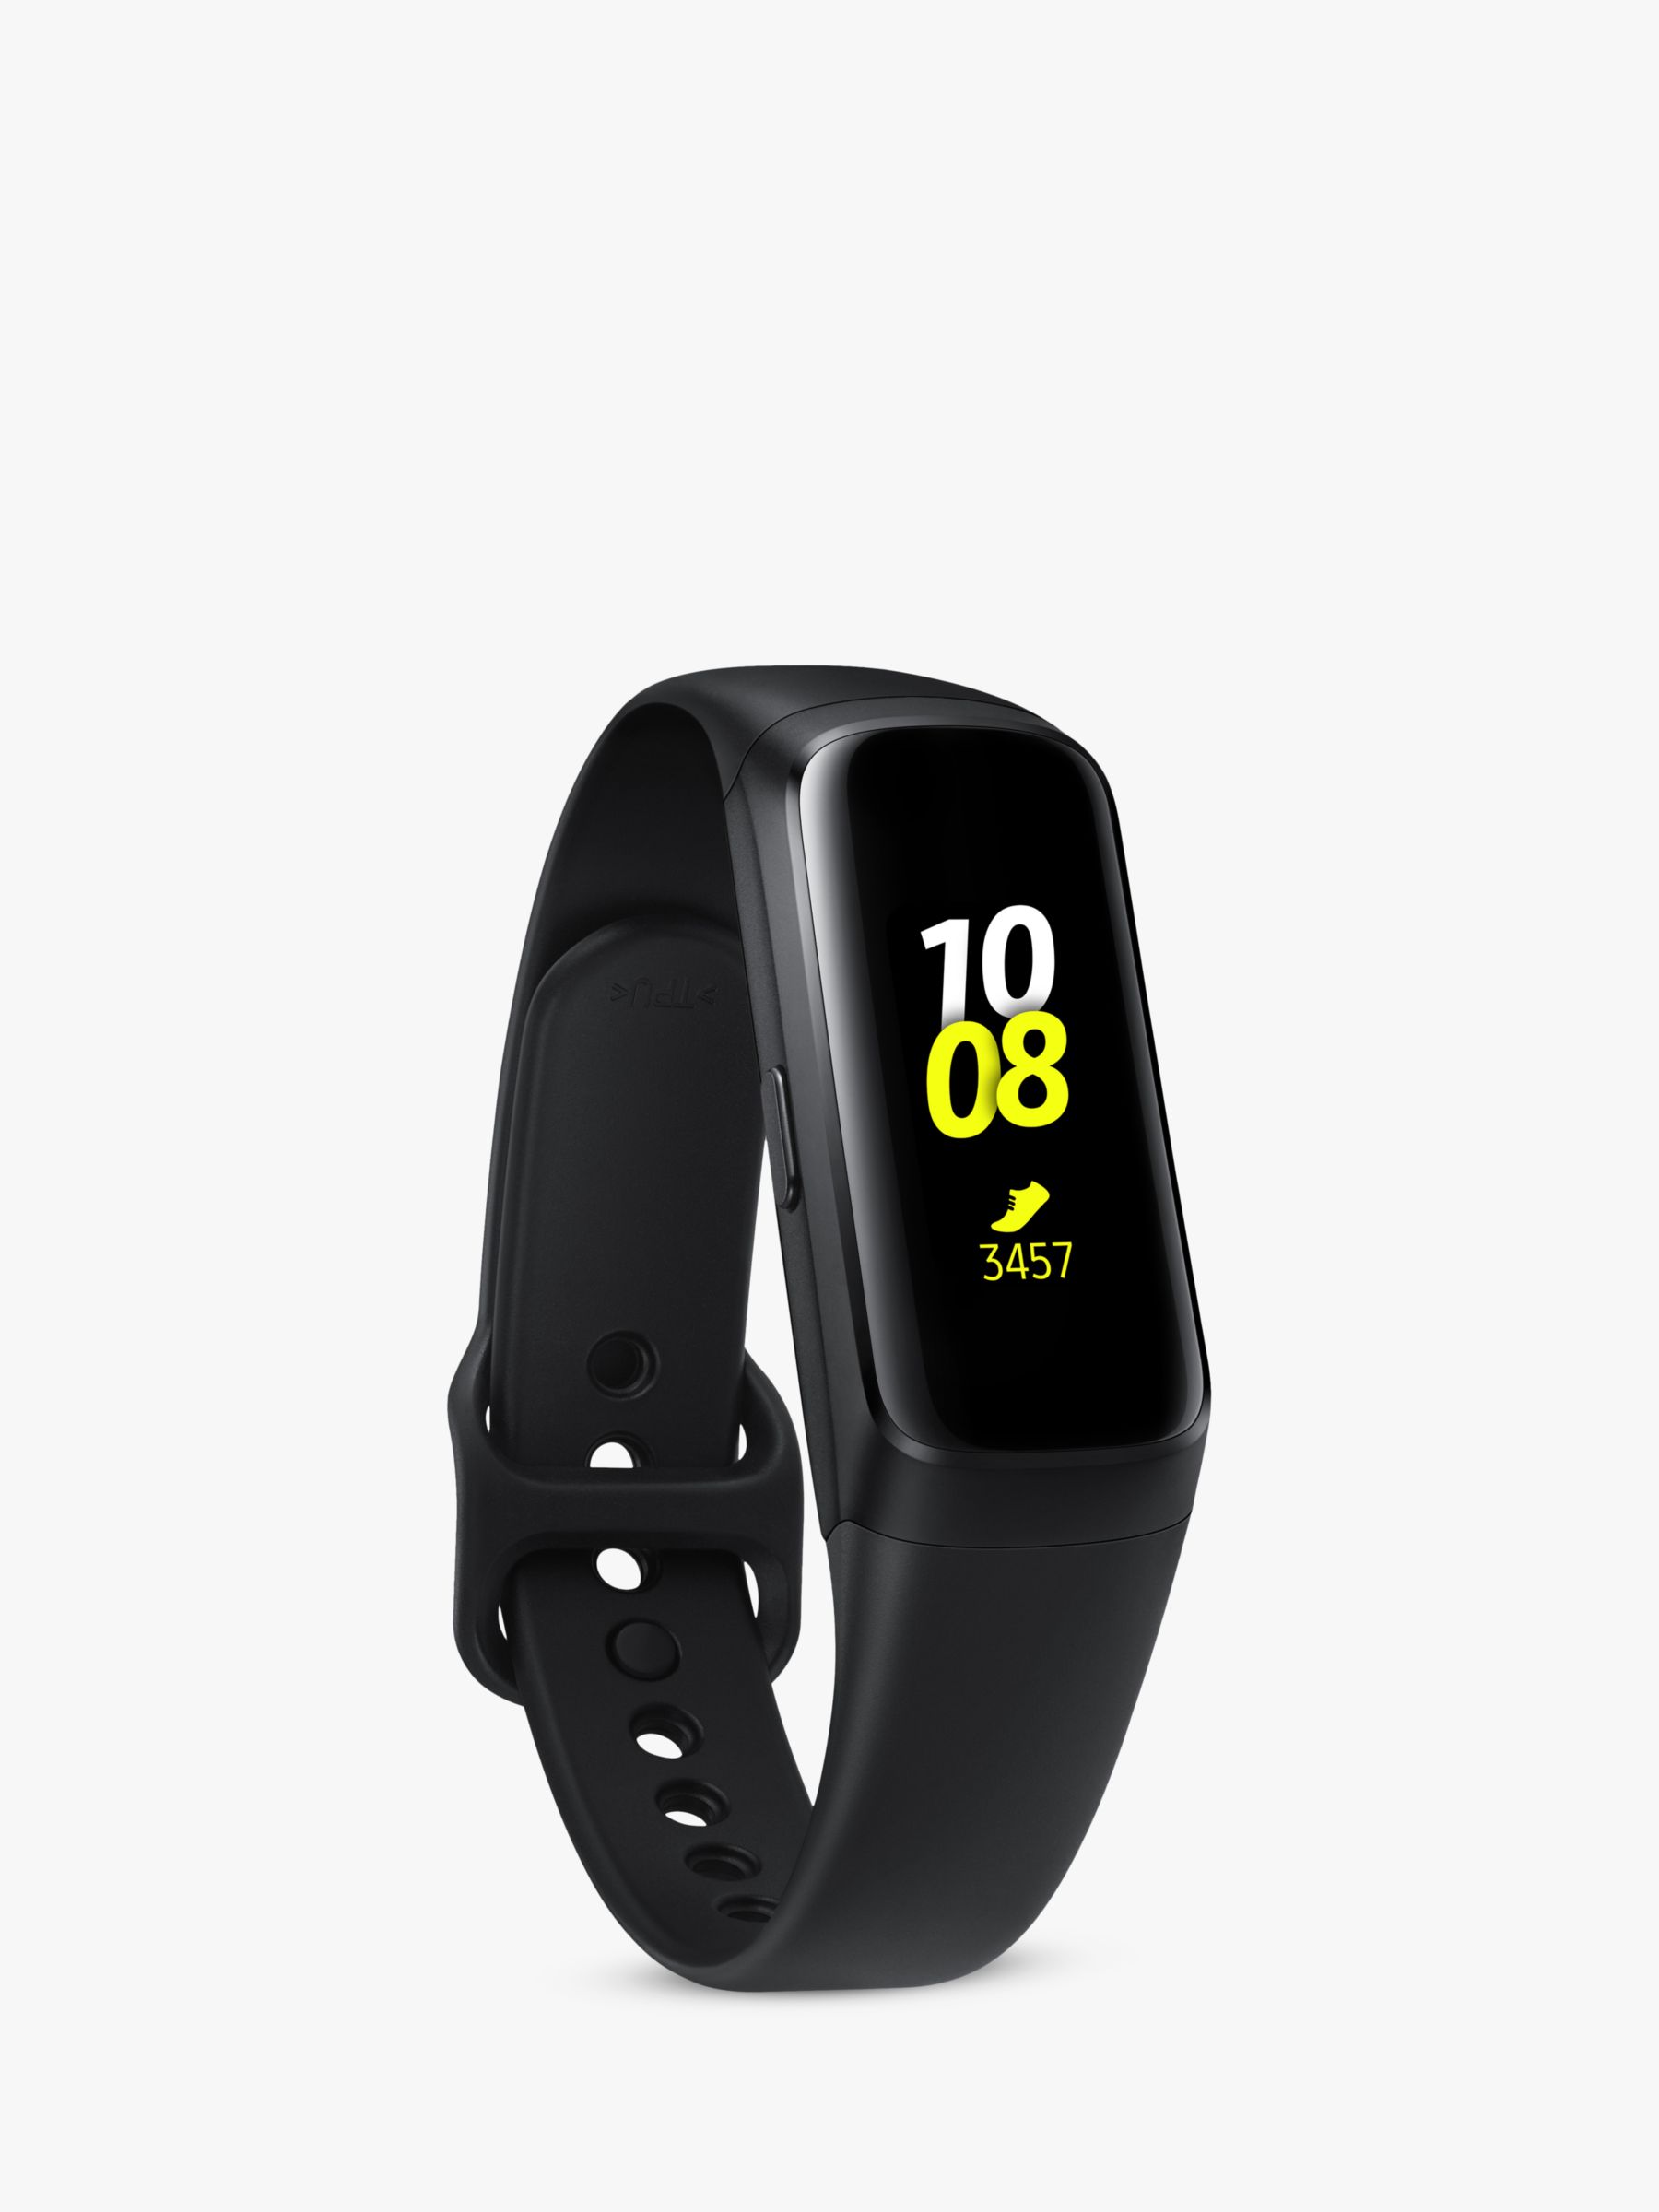 Samsung Galaxy Fit, Fitness Band with HR Monitoring at John Lewis ...